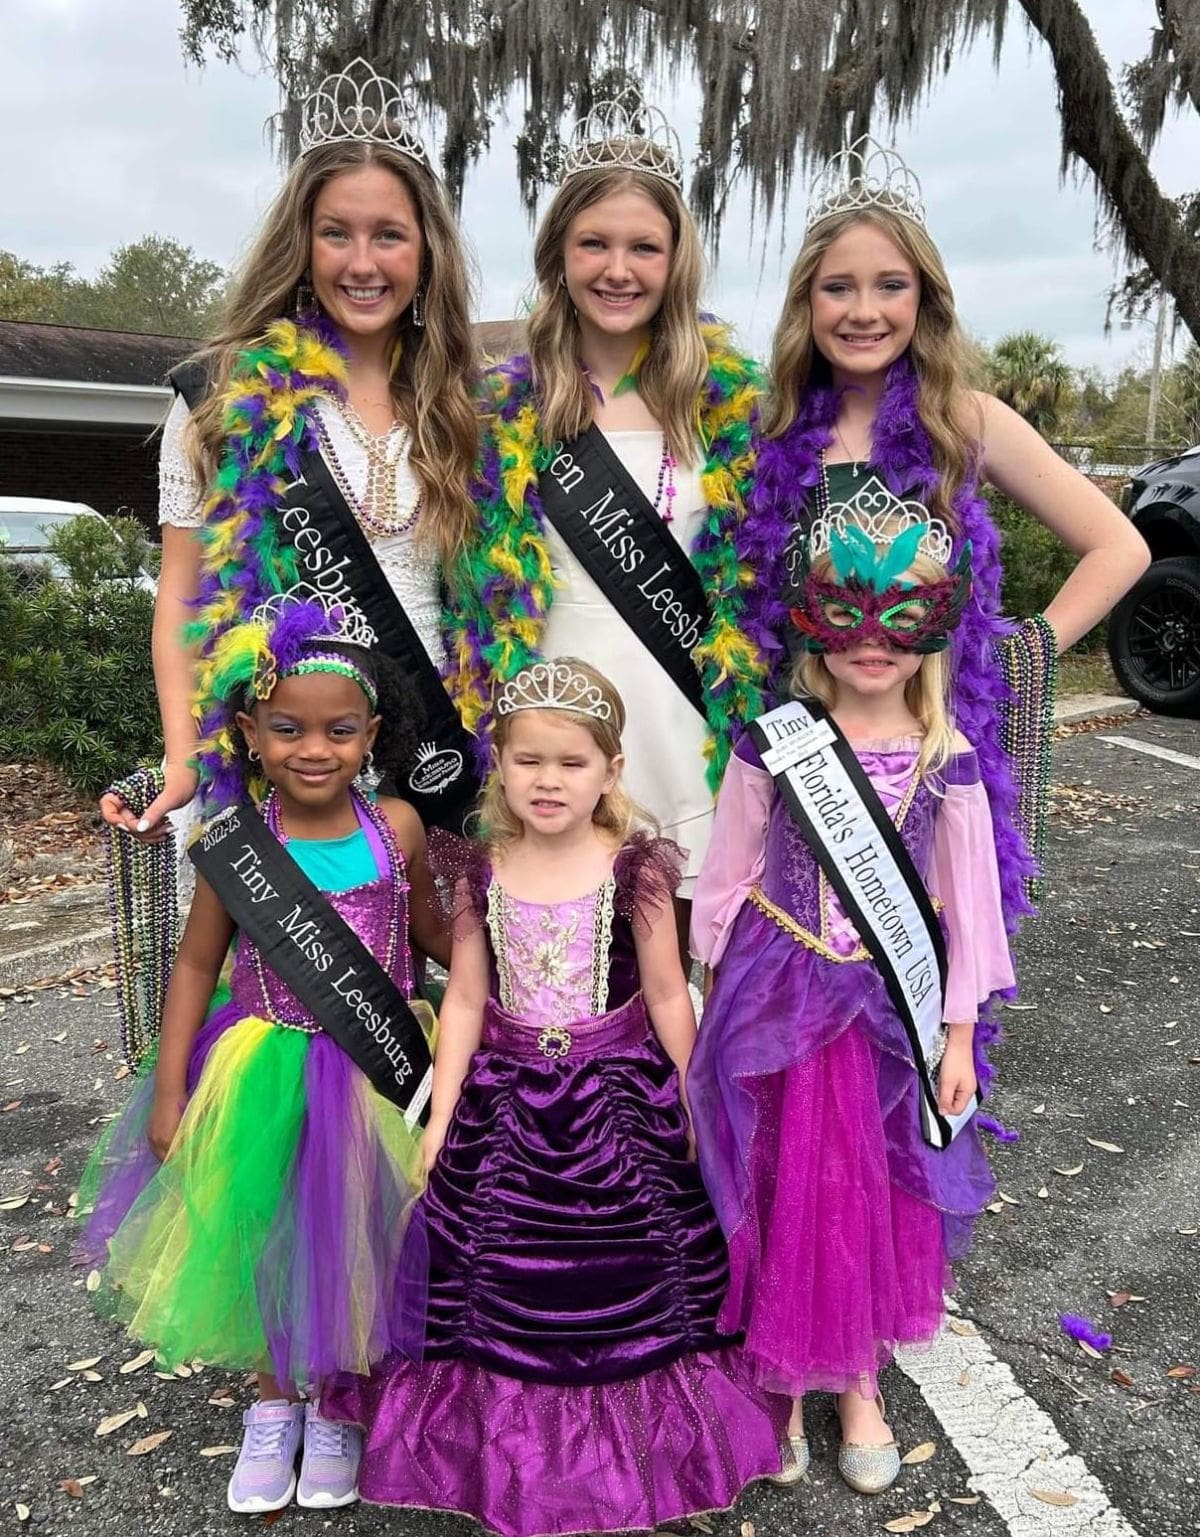 Scenes from Leesburg's Mardi Gras Party in the Street